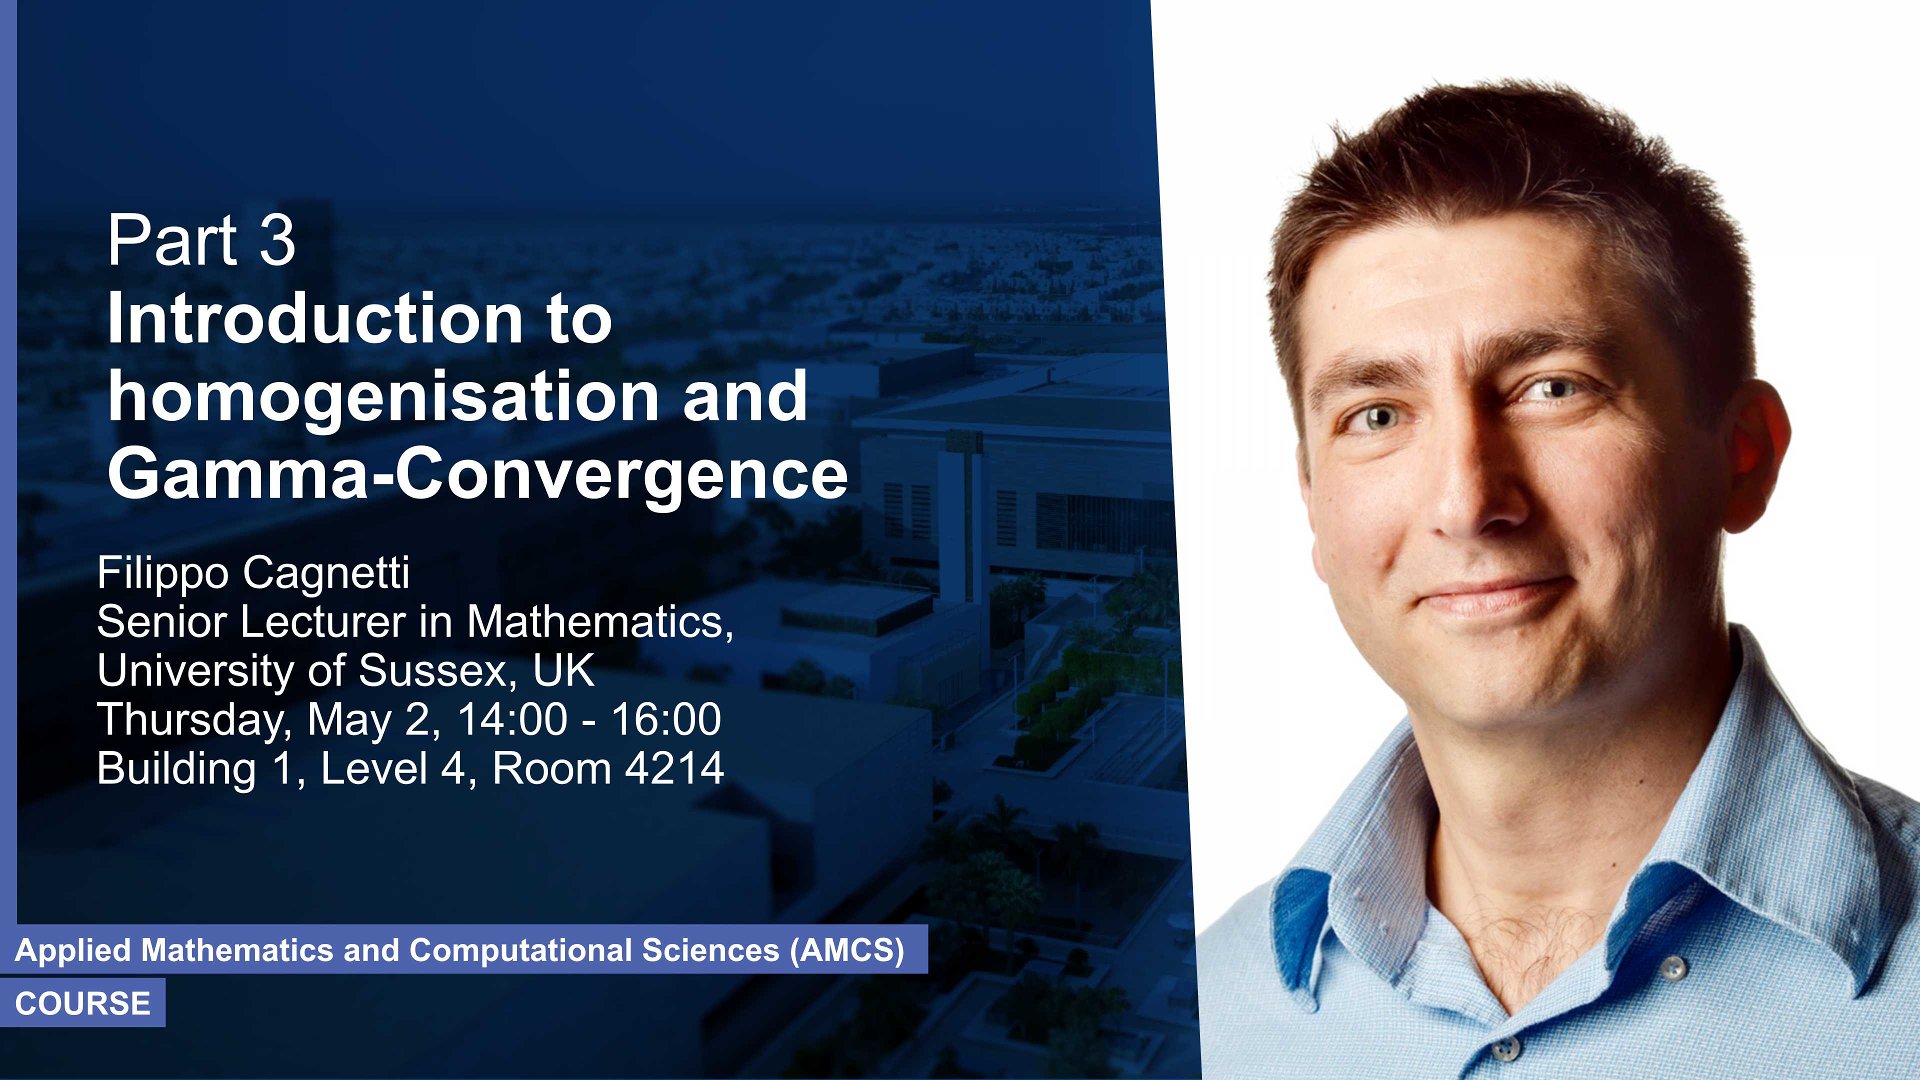 KAUST CEMSE AMCS Course Part 3 Filippo Cagnetti